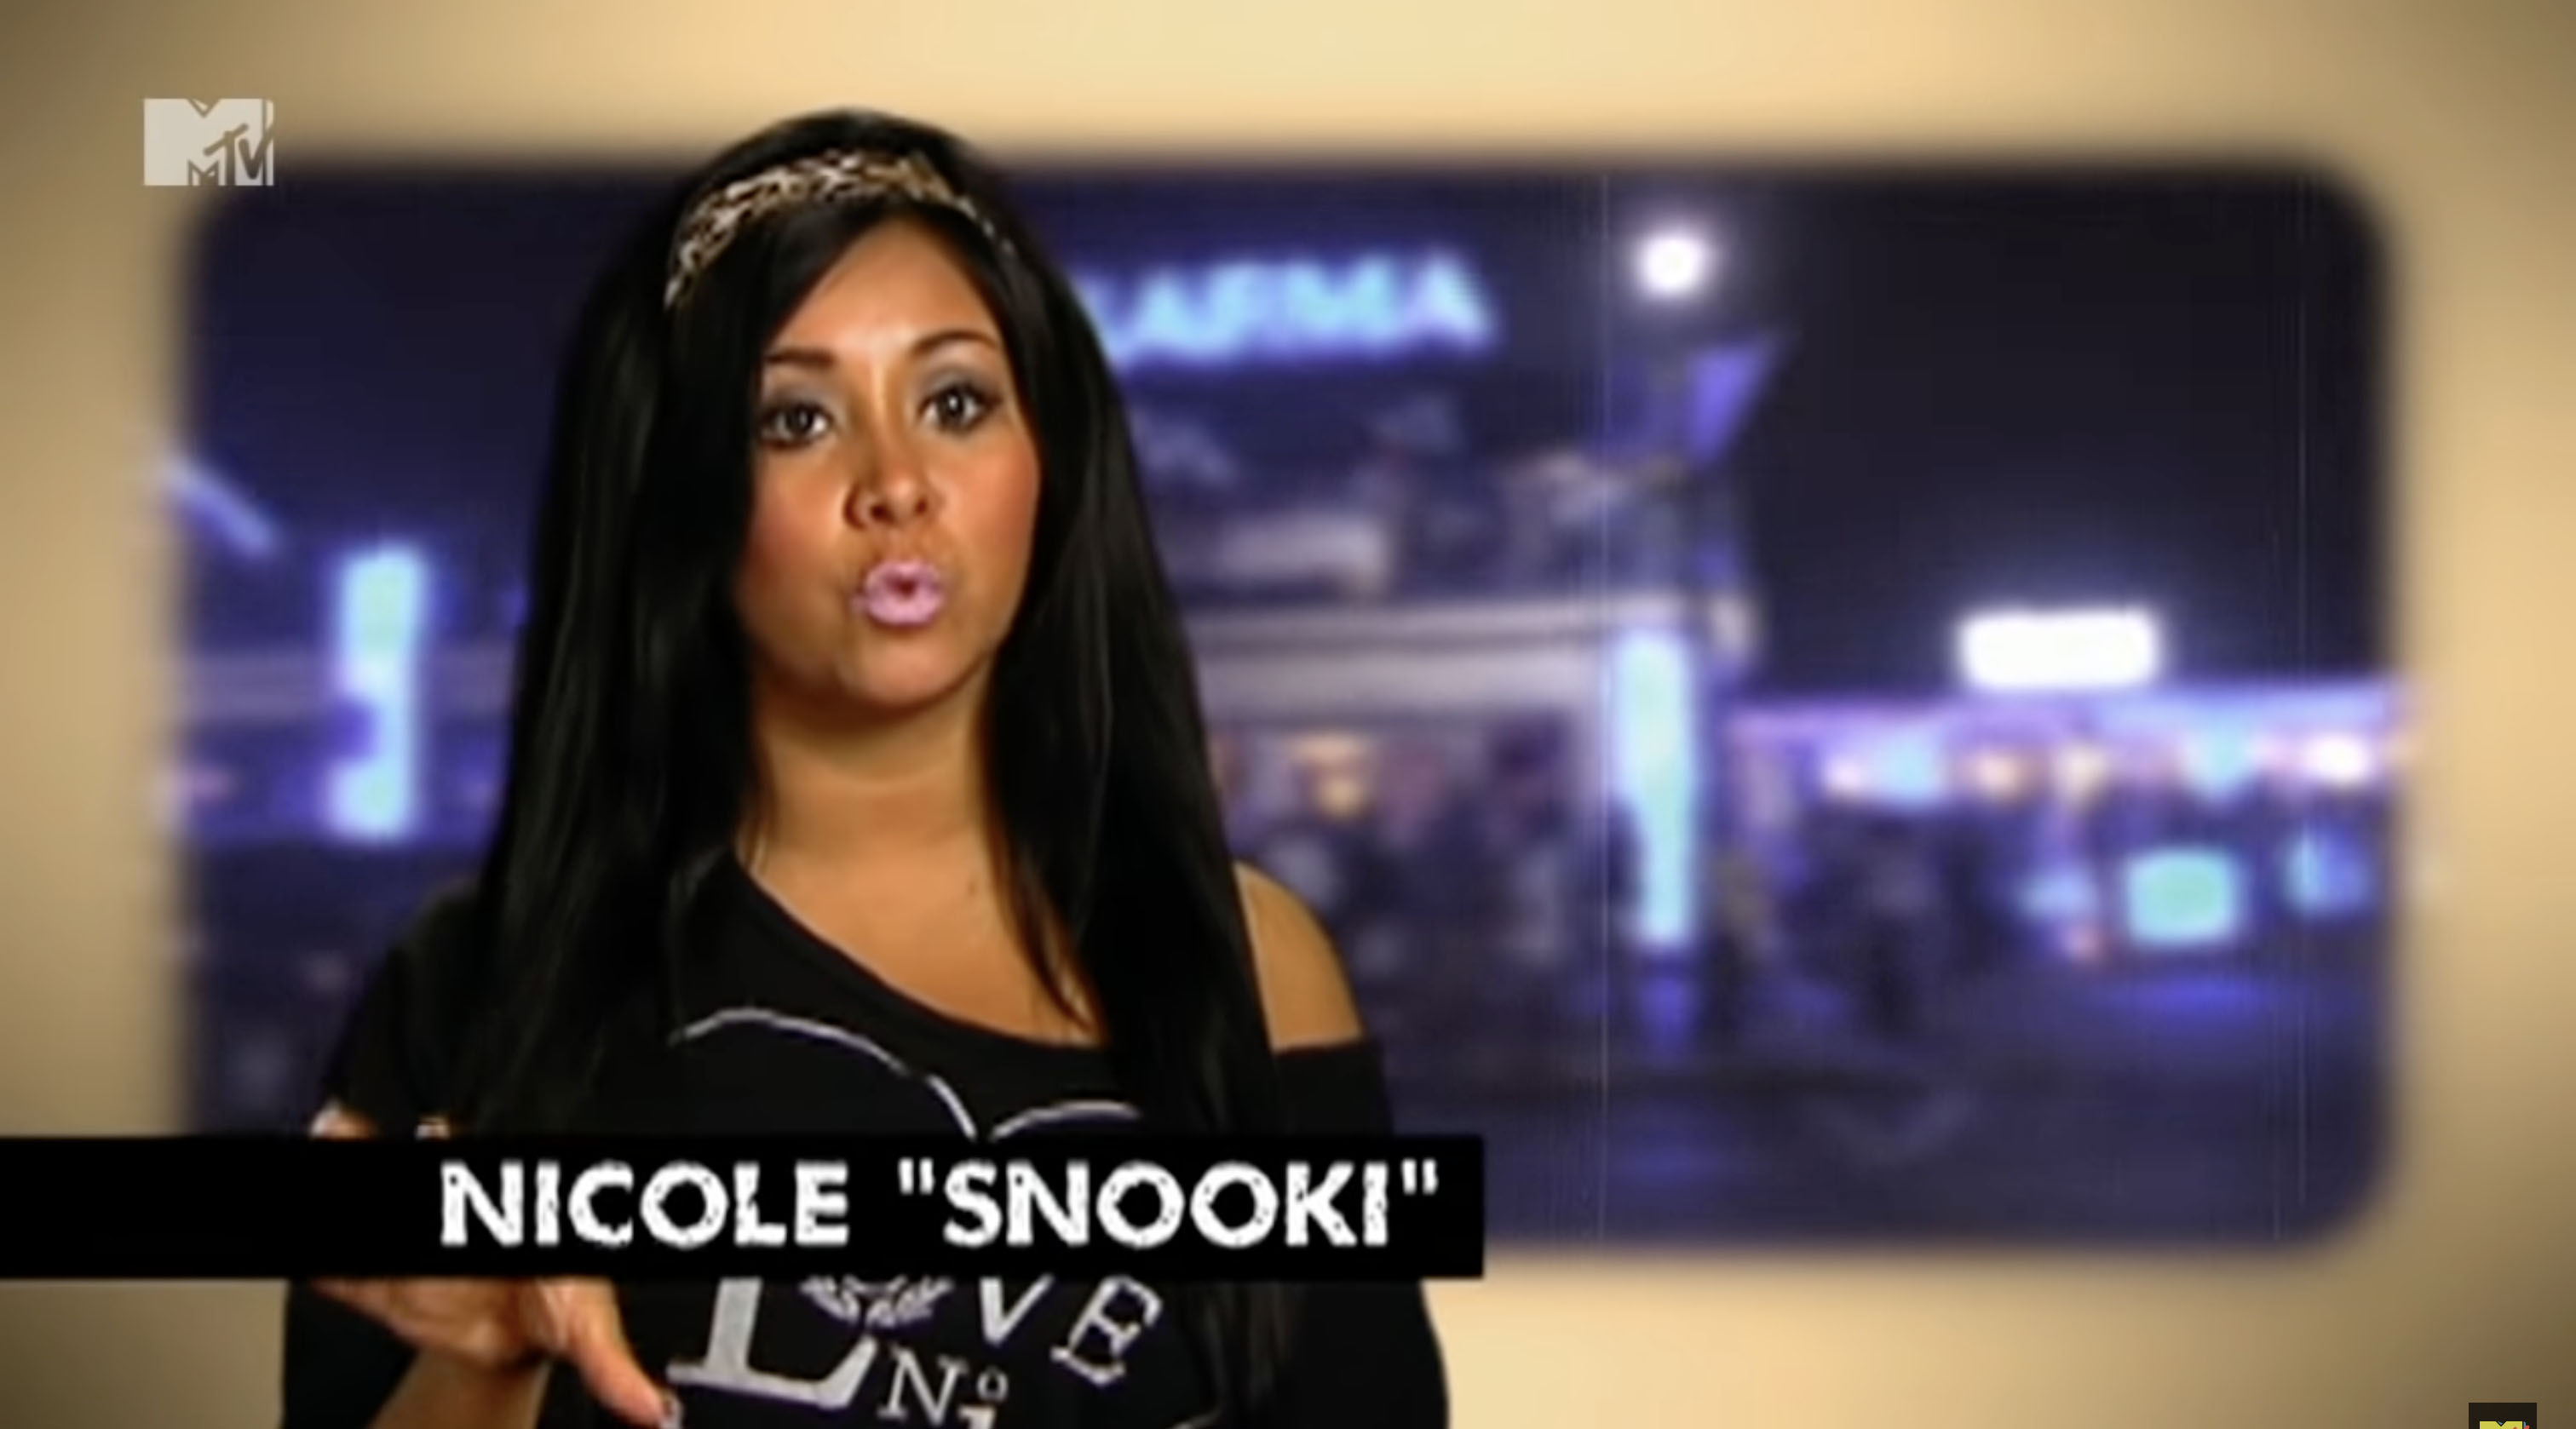 Meanwhile, fans are buzzing about a possible new addition to the cast amid rumors Nicole Polizzi is pregnant